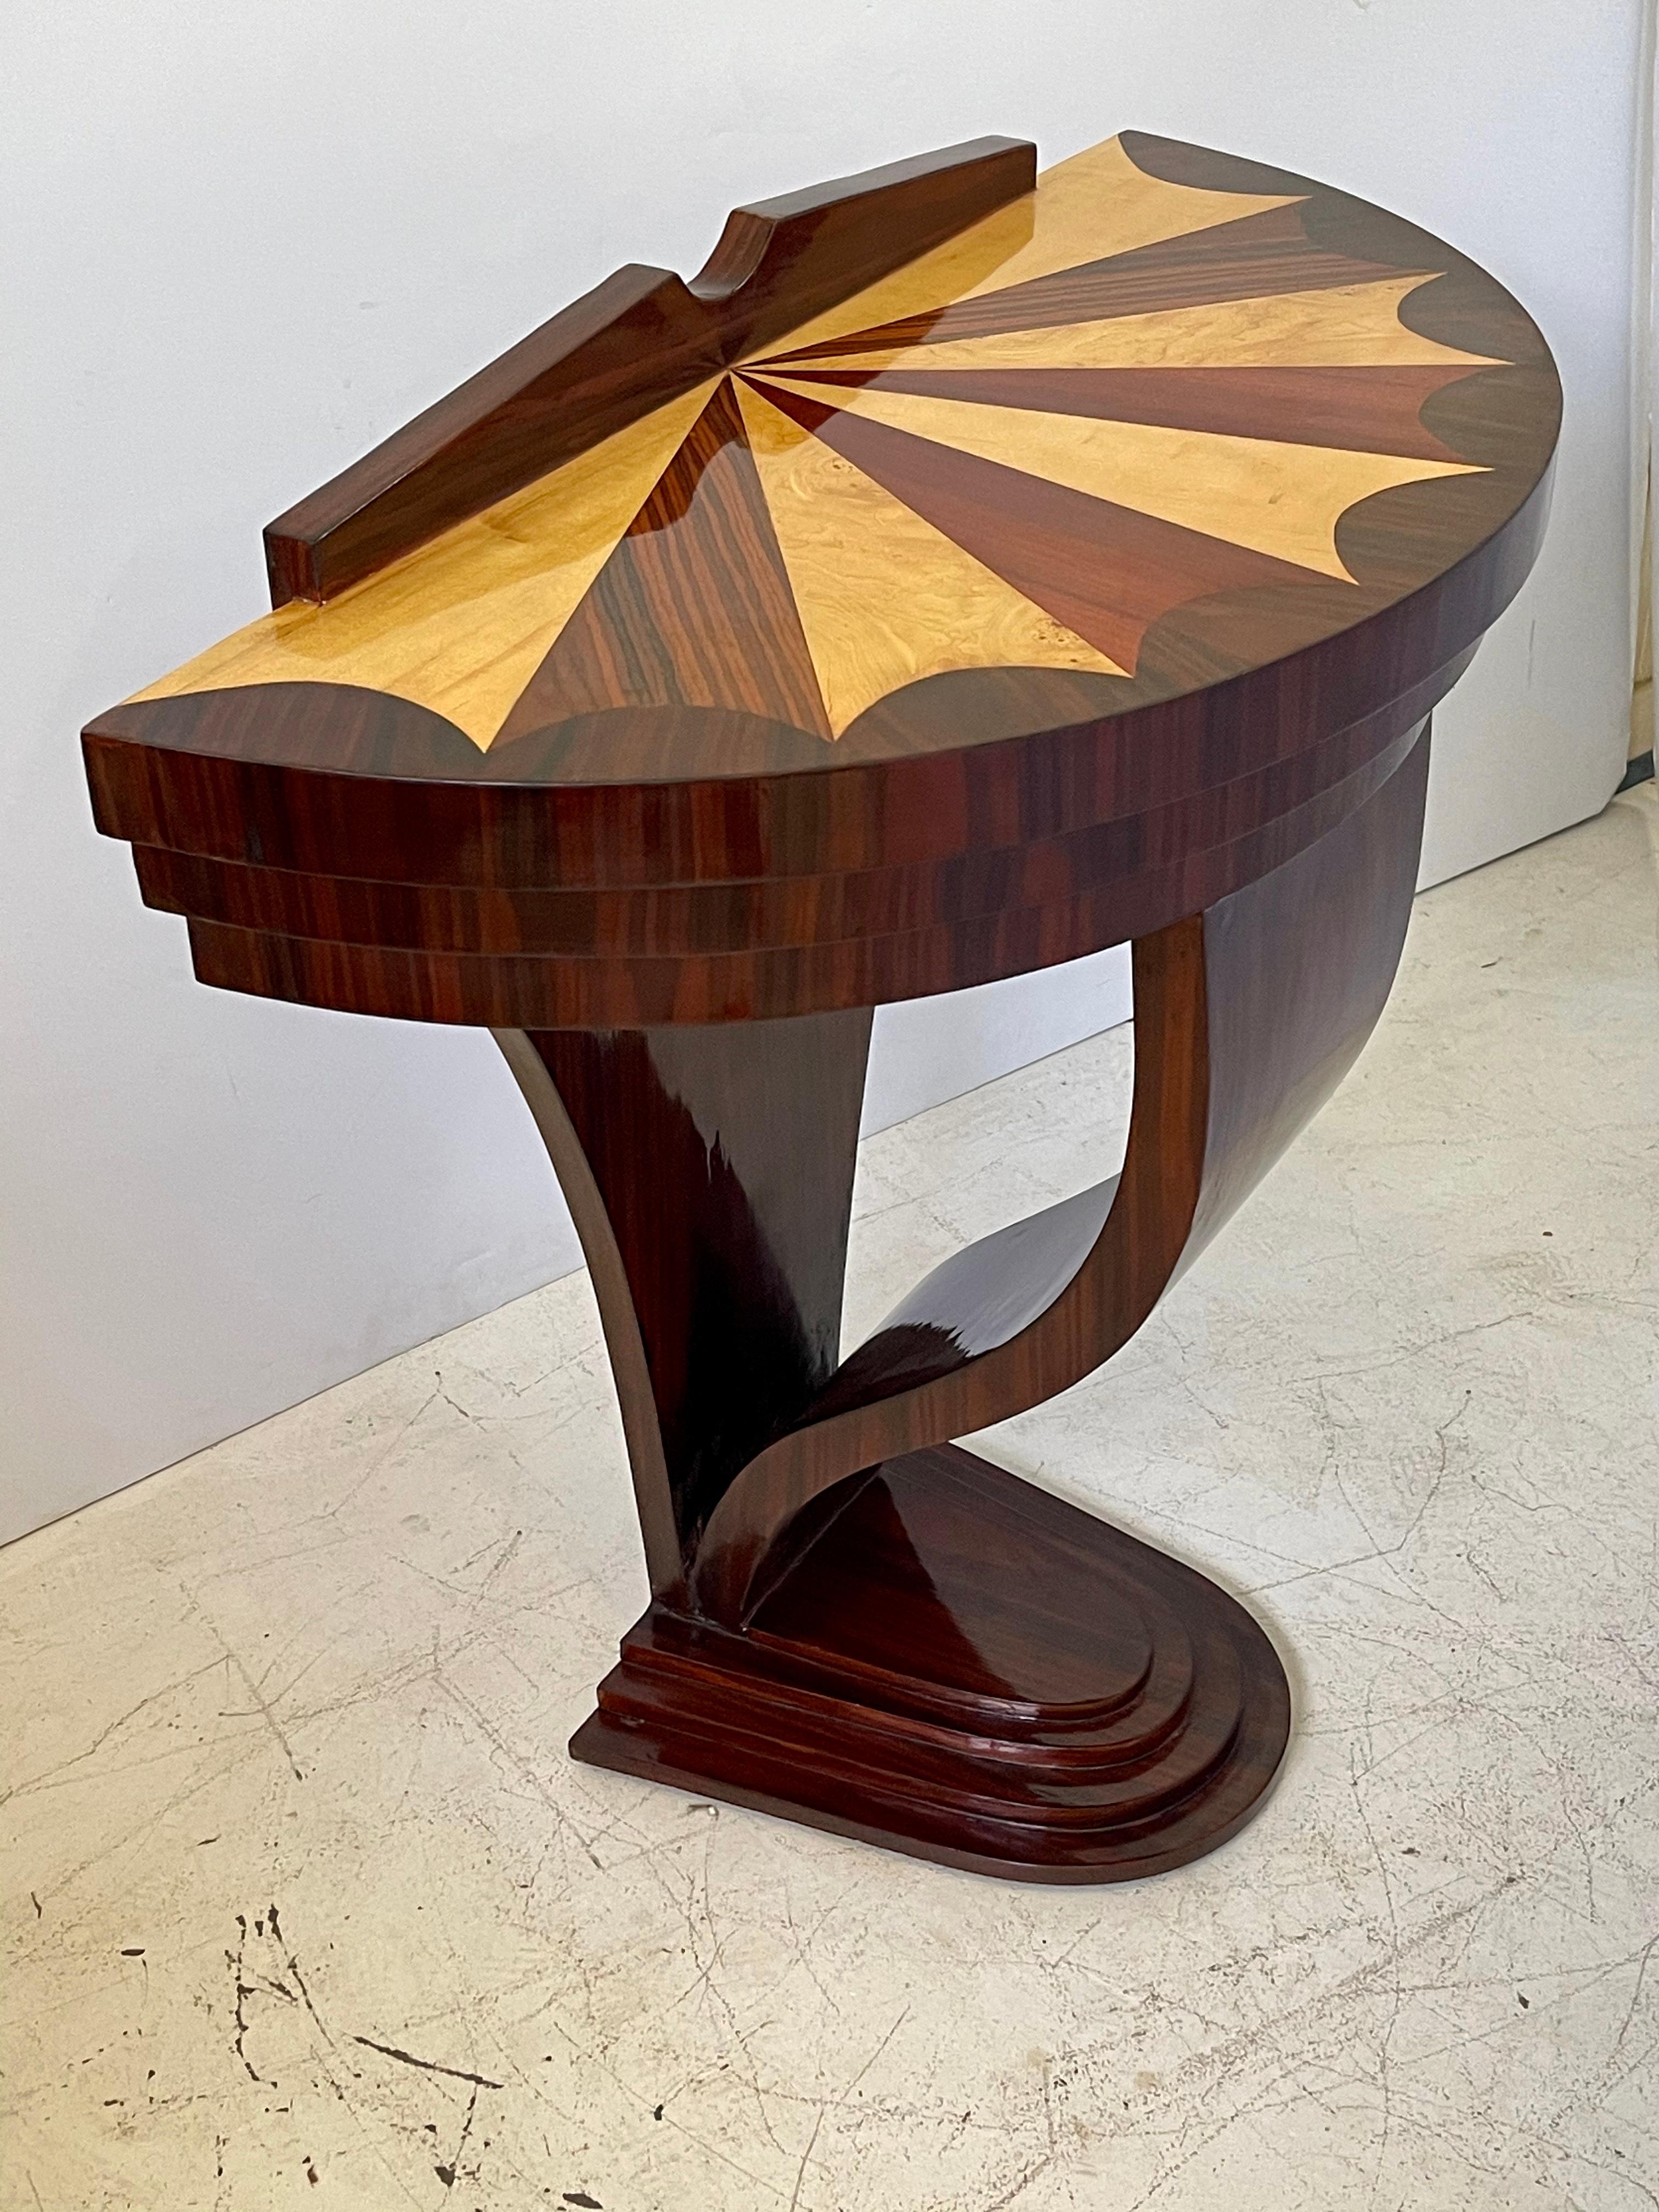 20th century Italian console table in the Art Deco style with a demilune shaped top with extraordinary veneer and fan inlay. The table’s frieze is recessed into three tiers over a tapered and downswept bentwood front leg that terminates into a